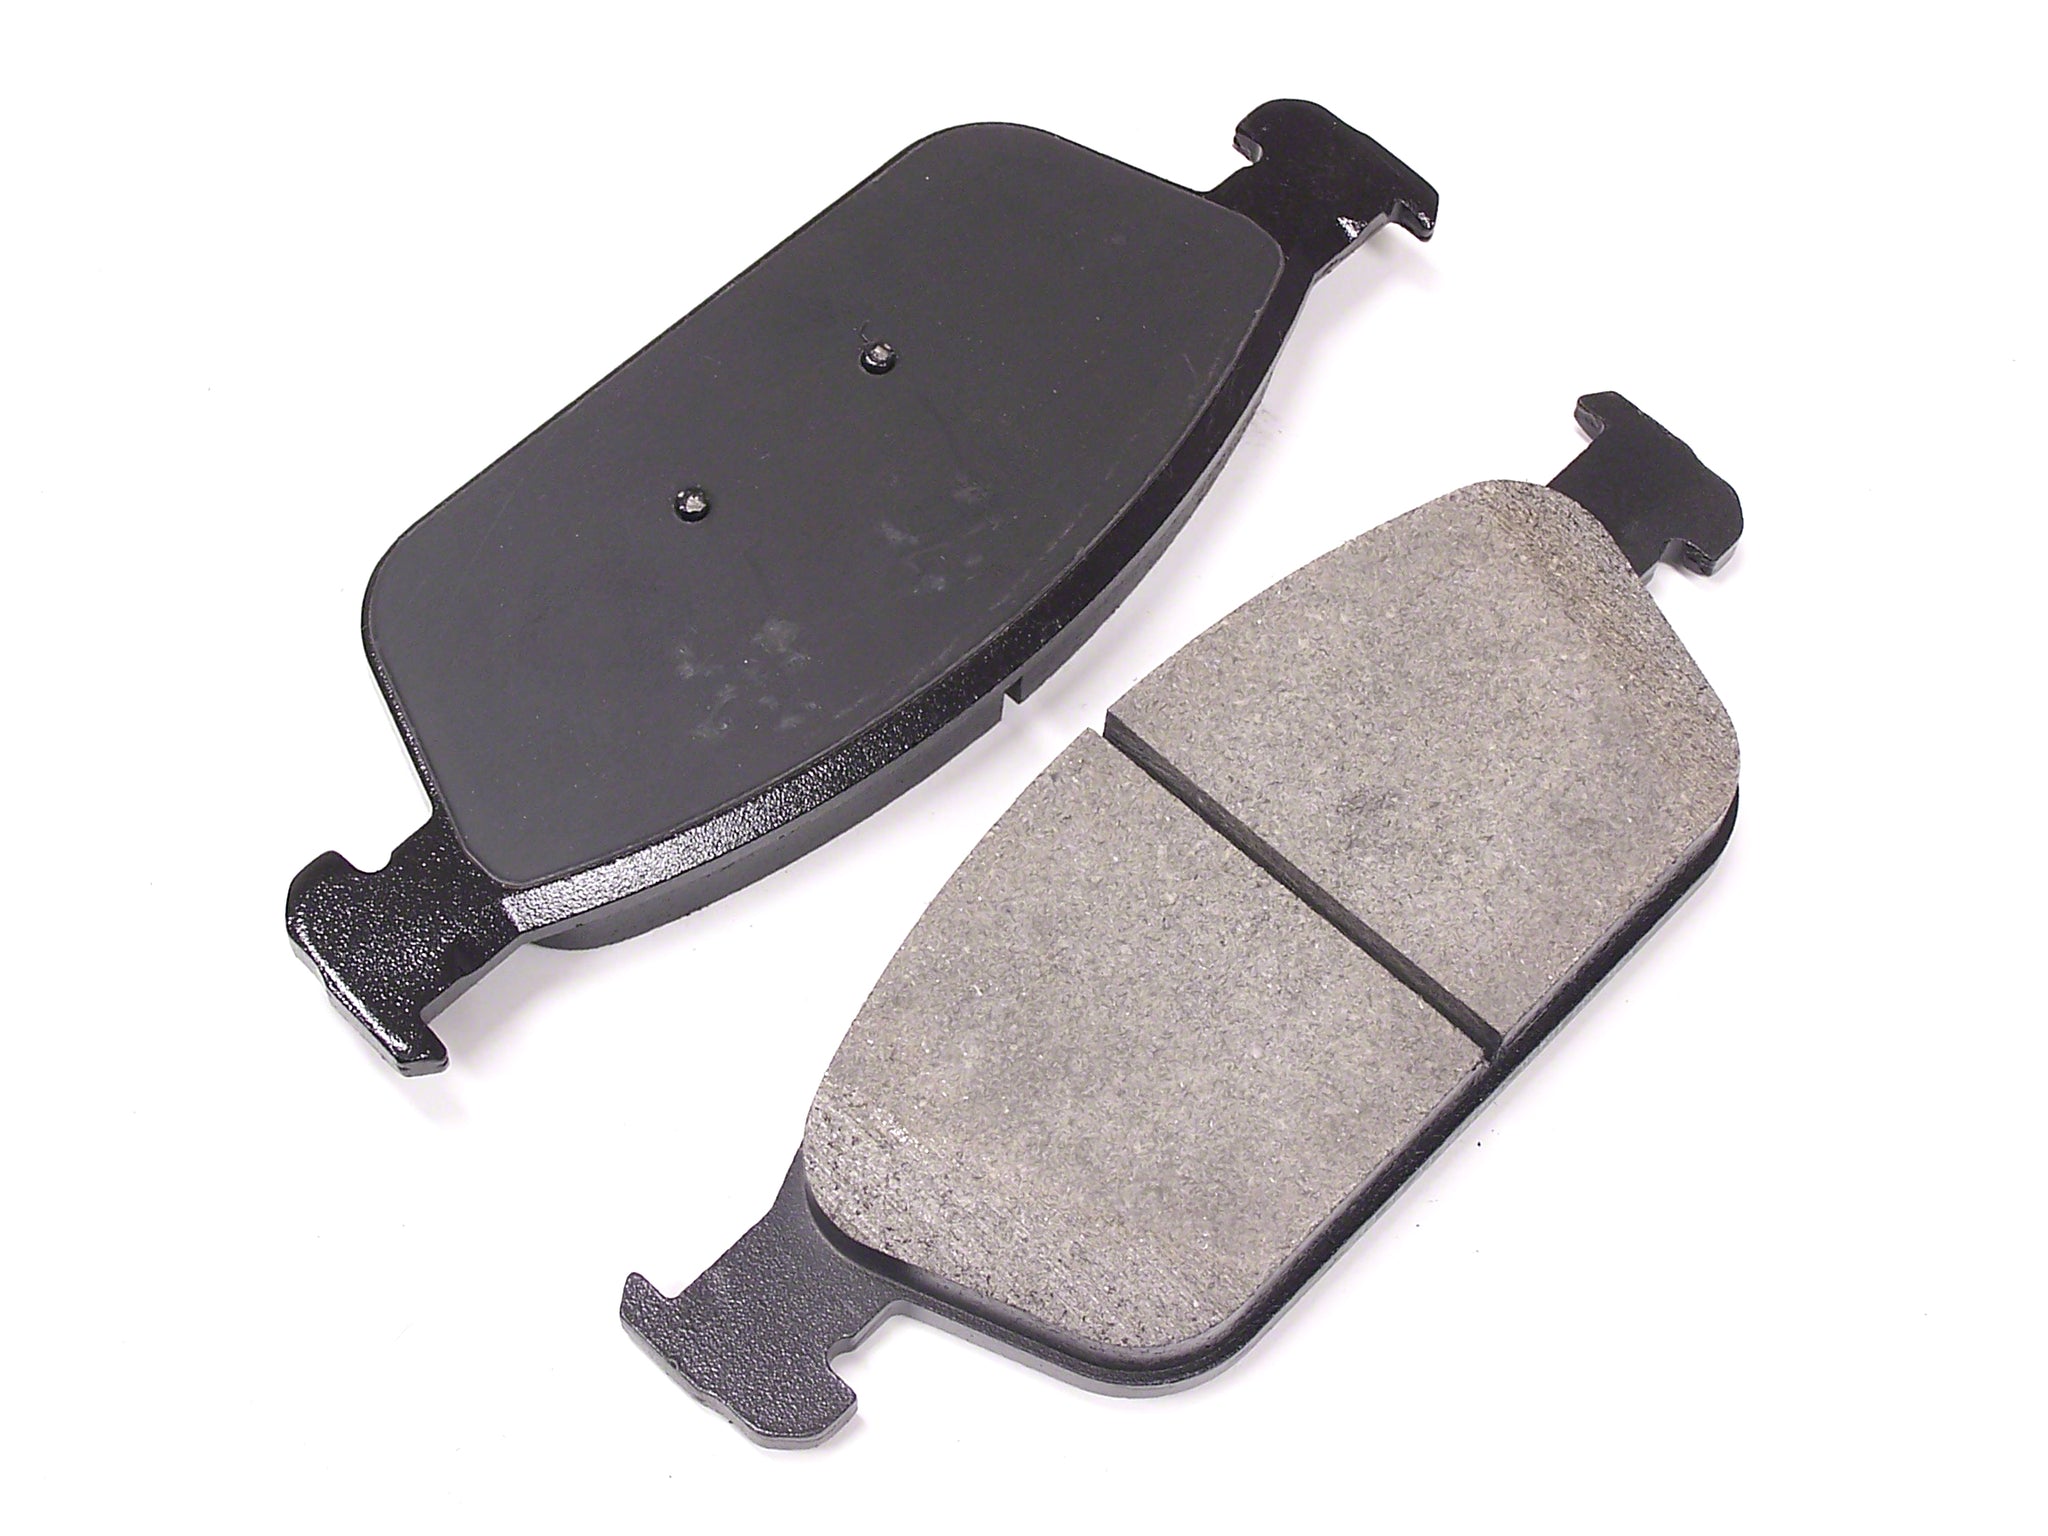 brake pads for a ford focus